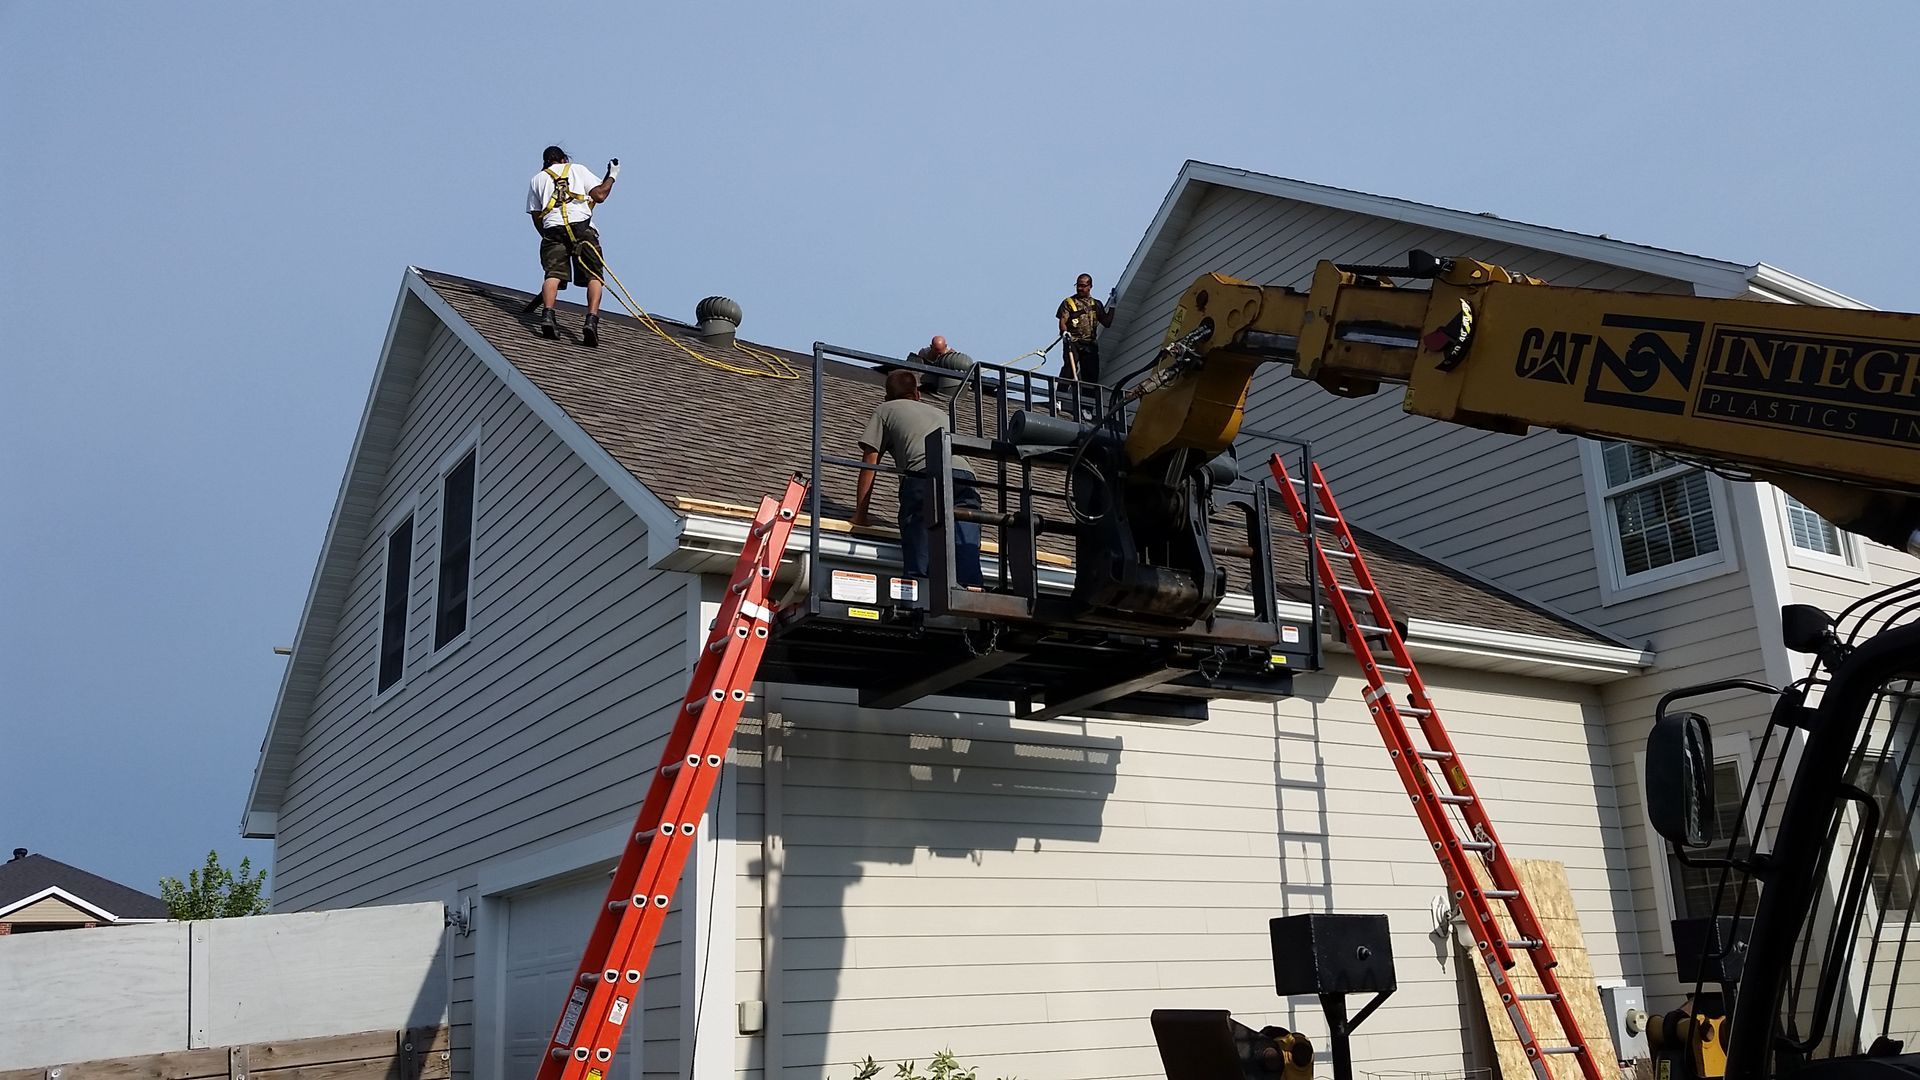 fiberglass shingles being torn off by roofers with hand tools, safety harnesses and ladders near the Fargo-Moorhead area